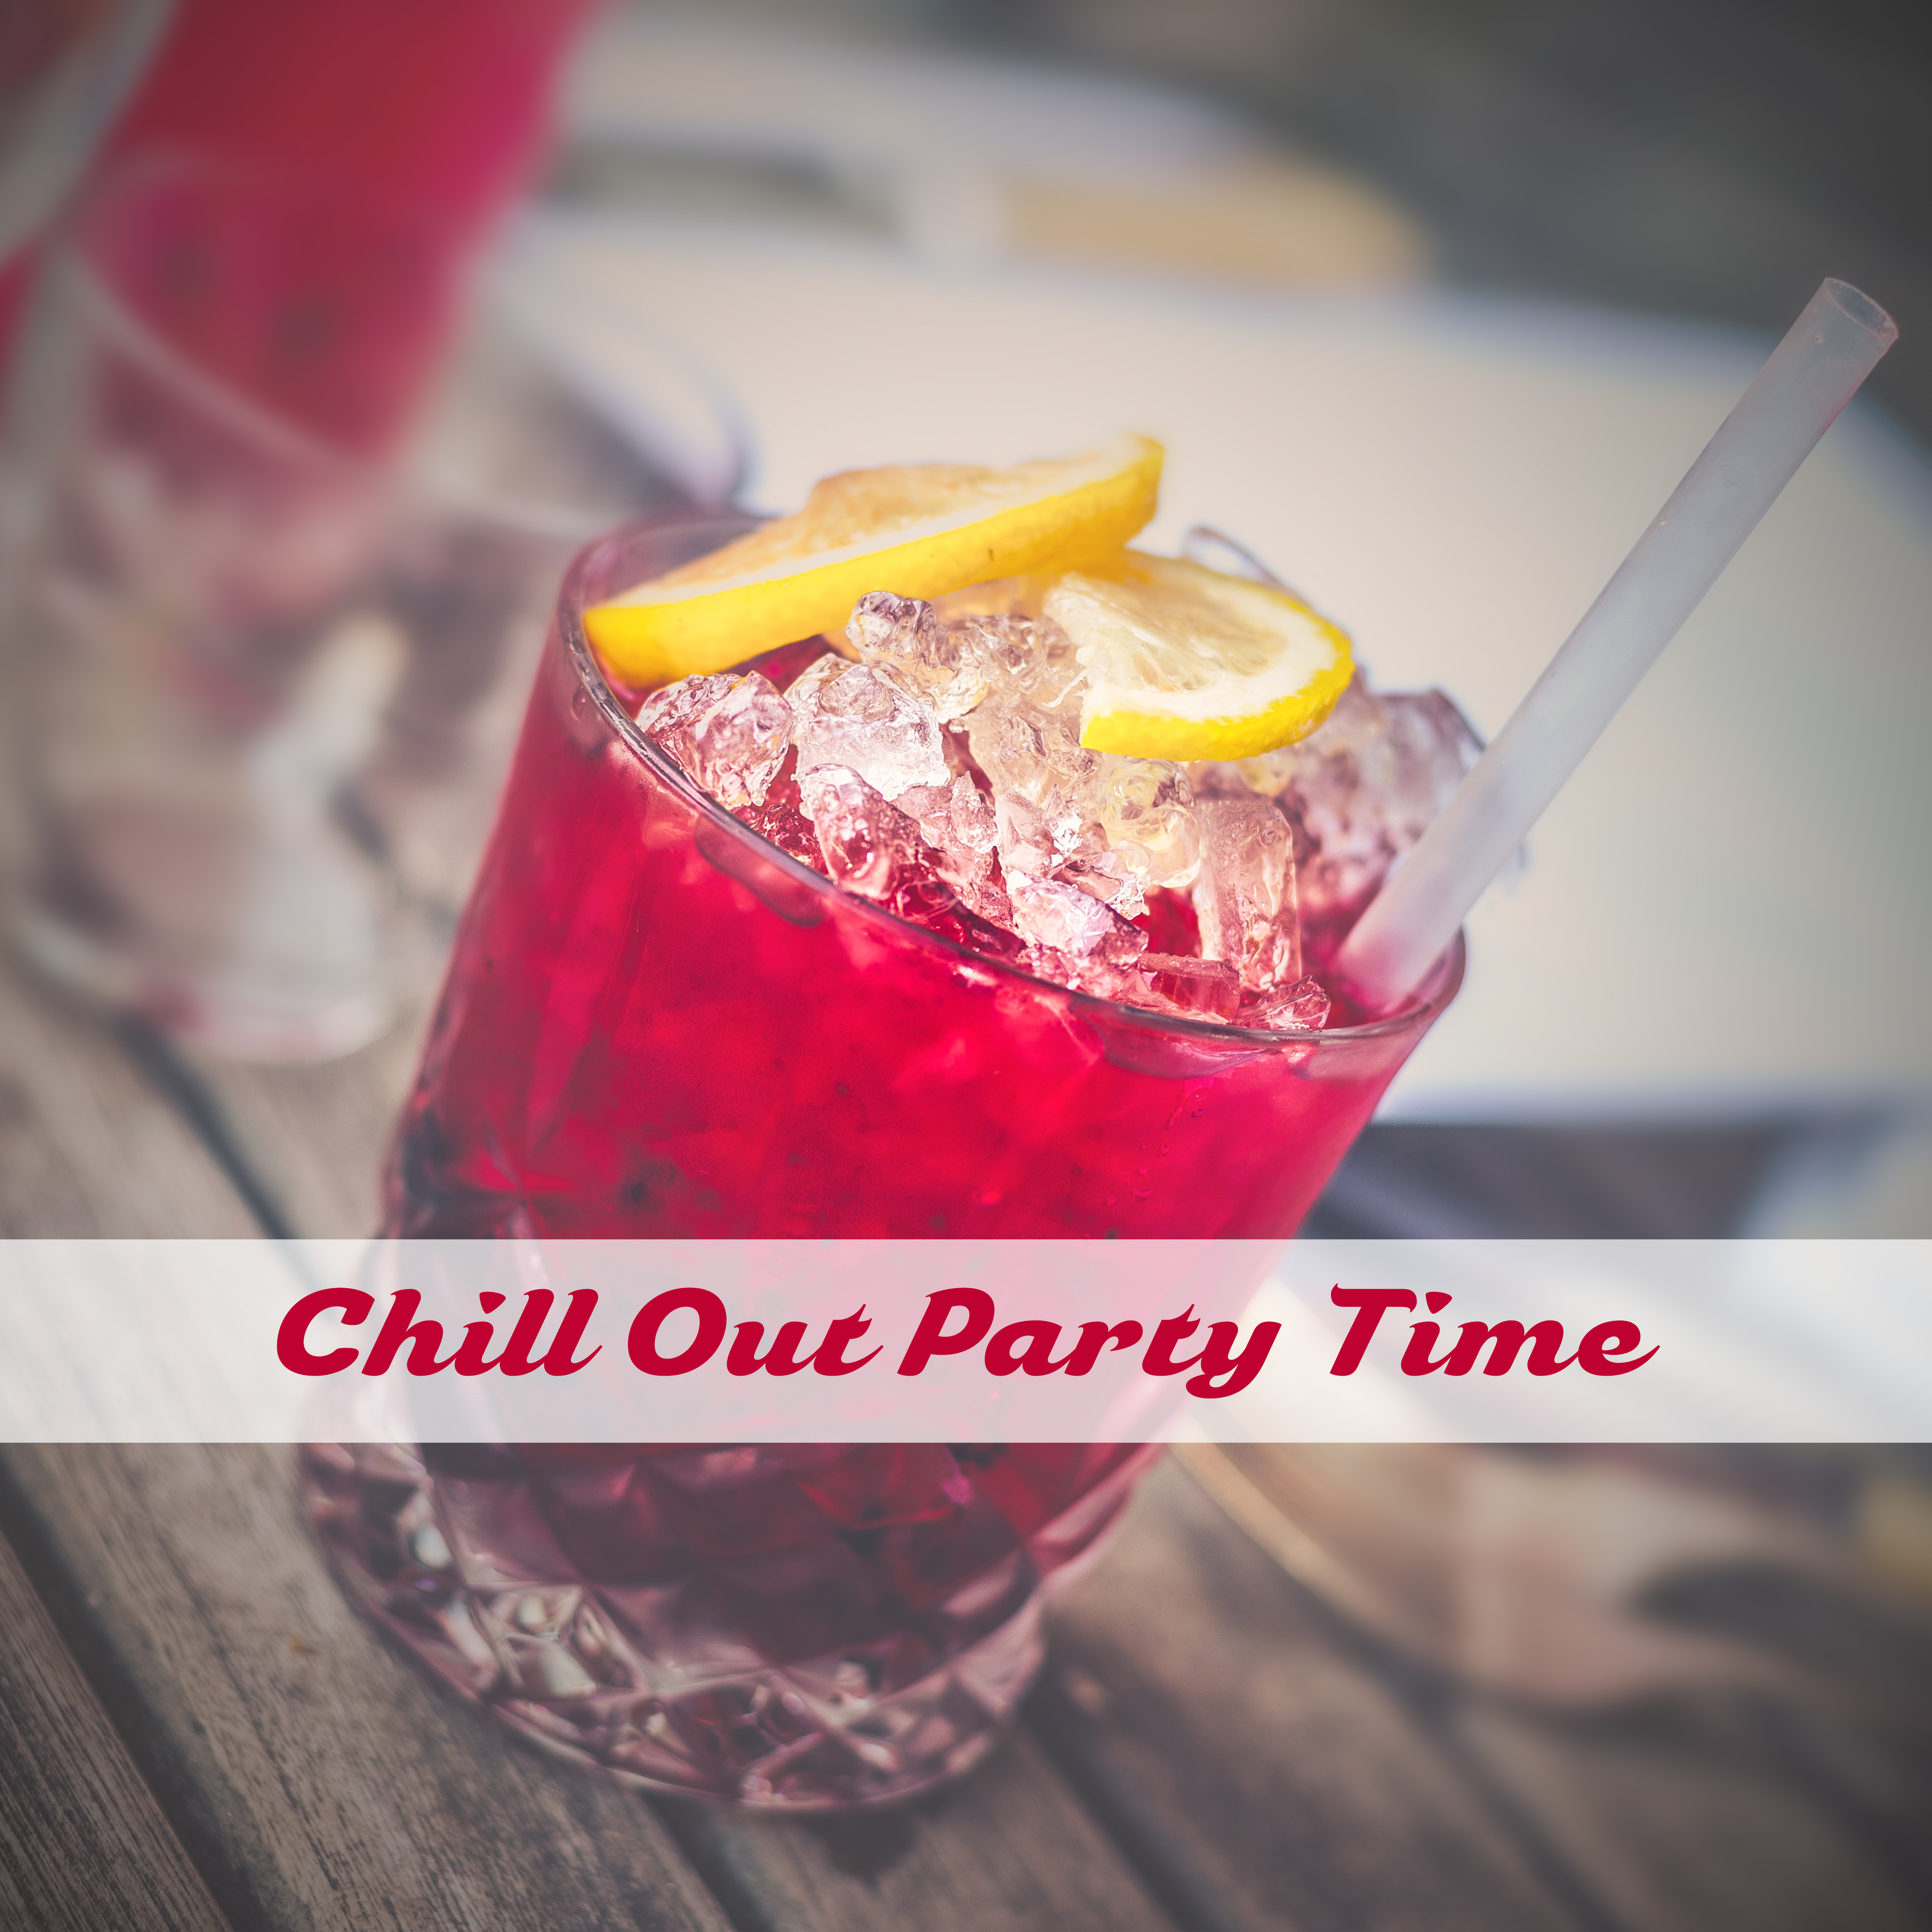 Chill Out Party Time – Ibiza Dance Party, Night Fun, Beach Drinks Bar, **** Dance